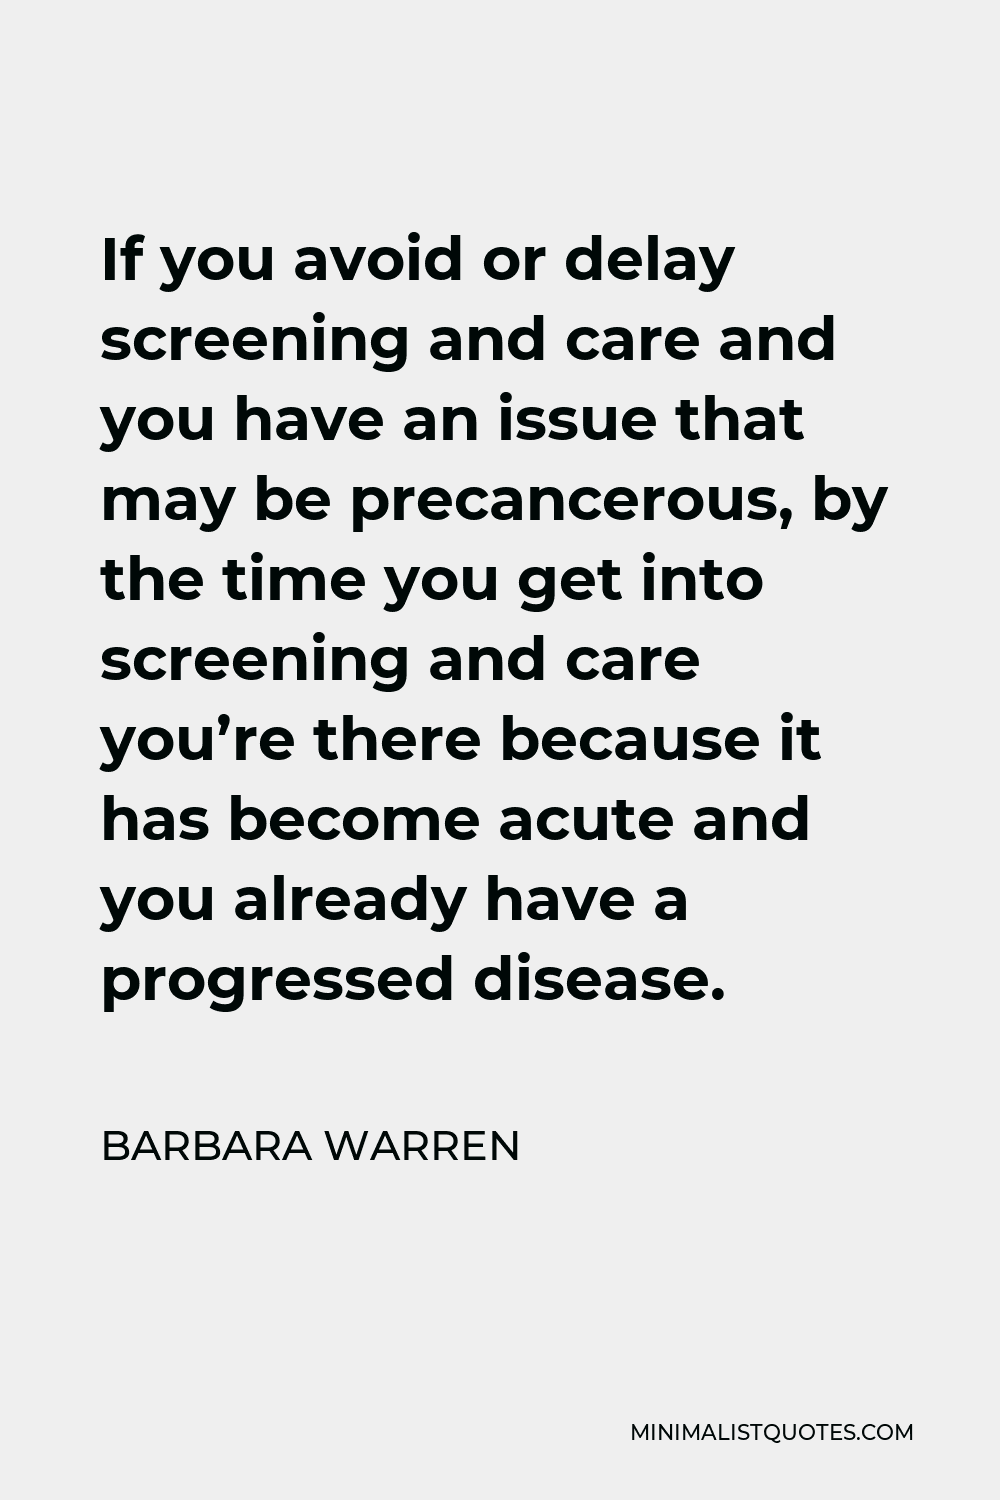 Barbara Warren Quote - If you avoid or delay screening and care and you have an issue that may be precancerous, by the time you get into screening and care you’re there because it has become acute and you already have a progressed disease.